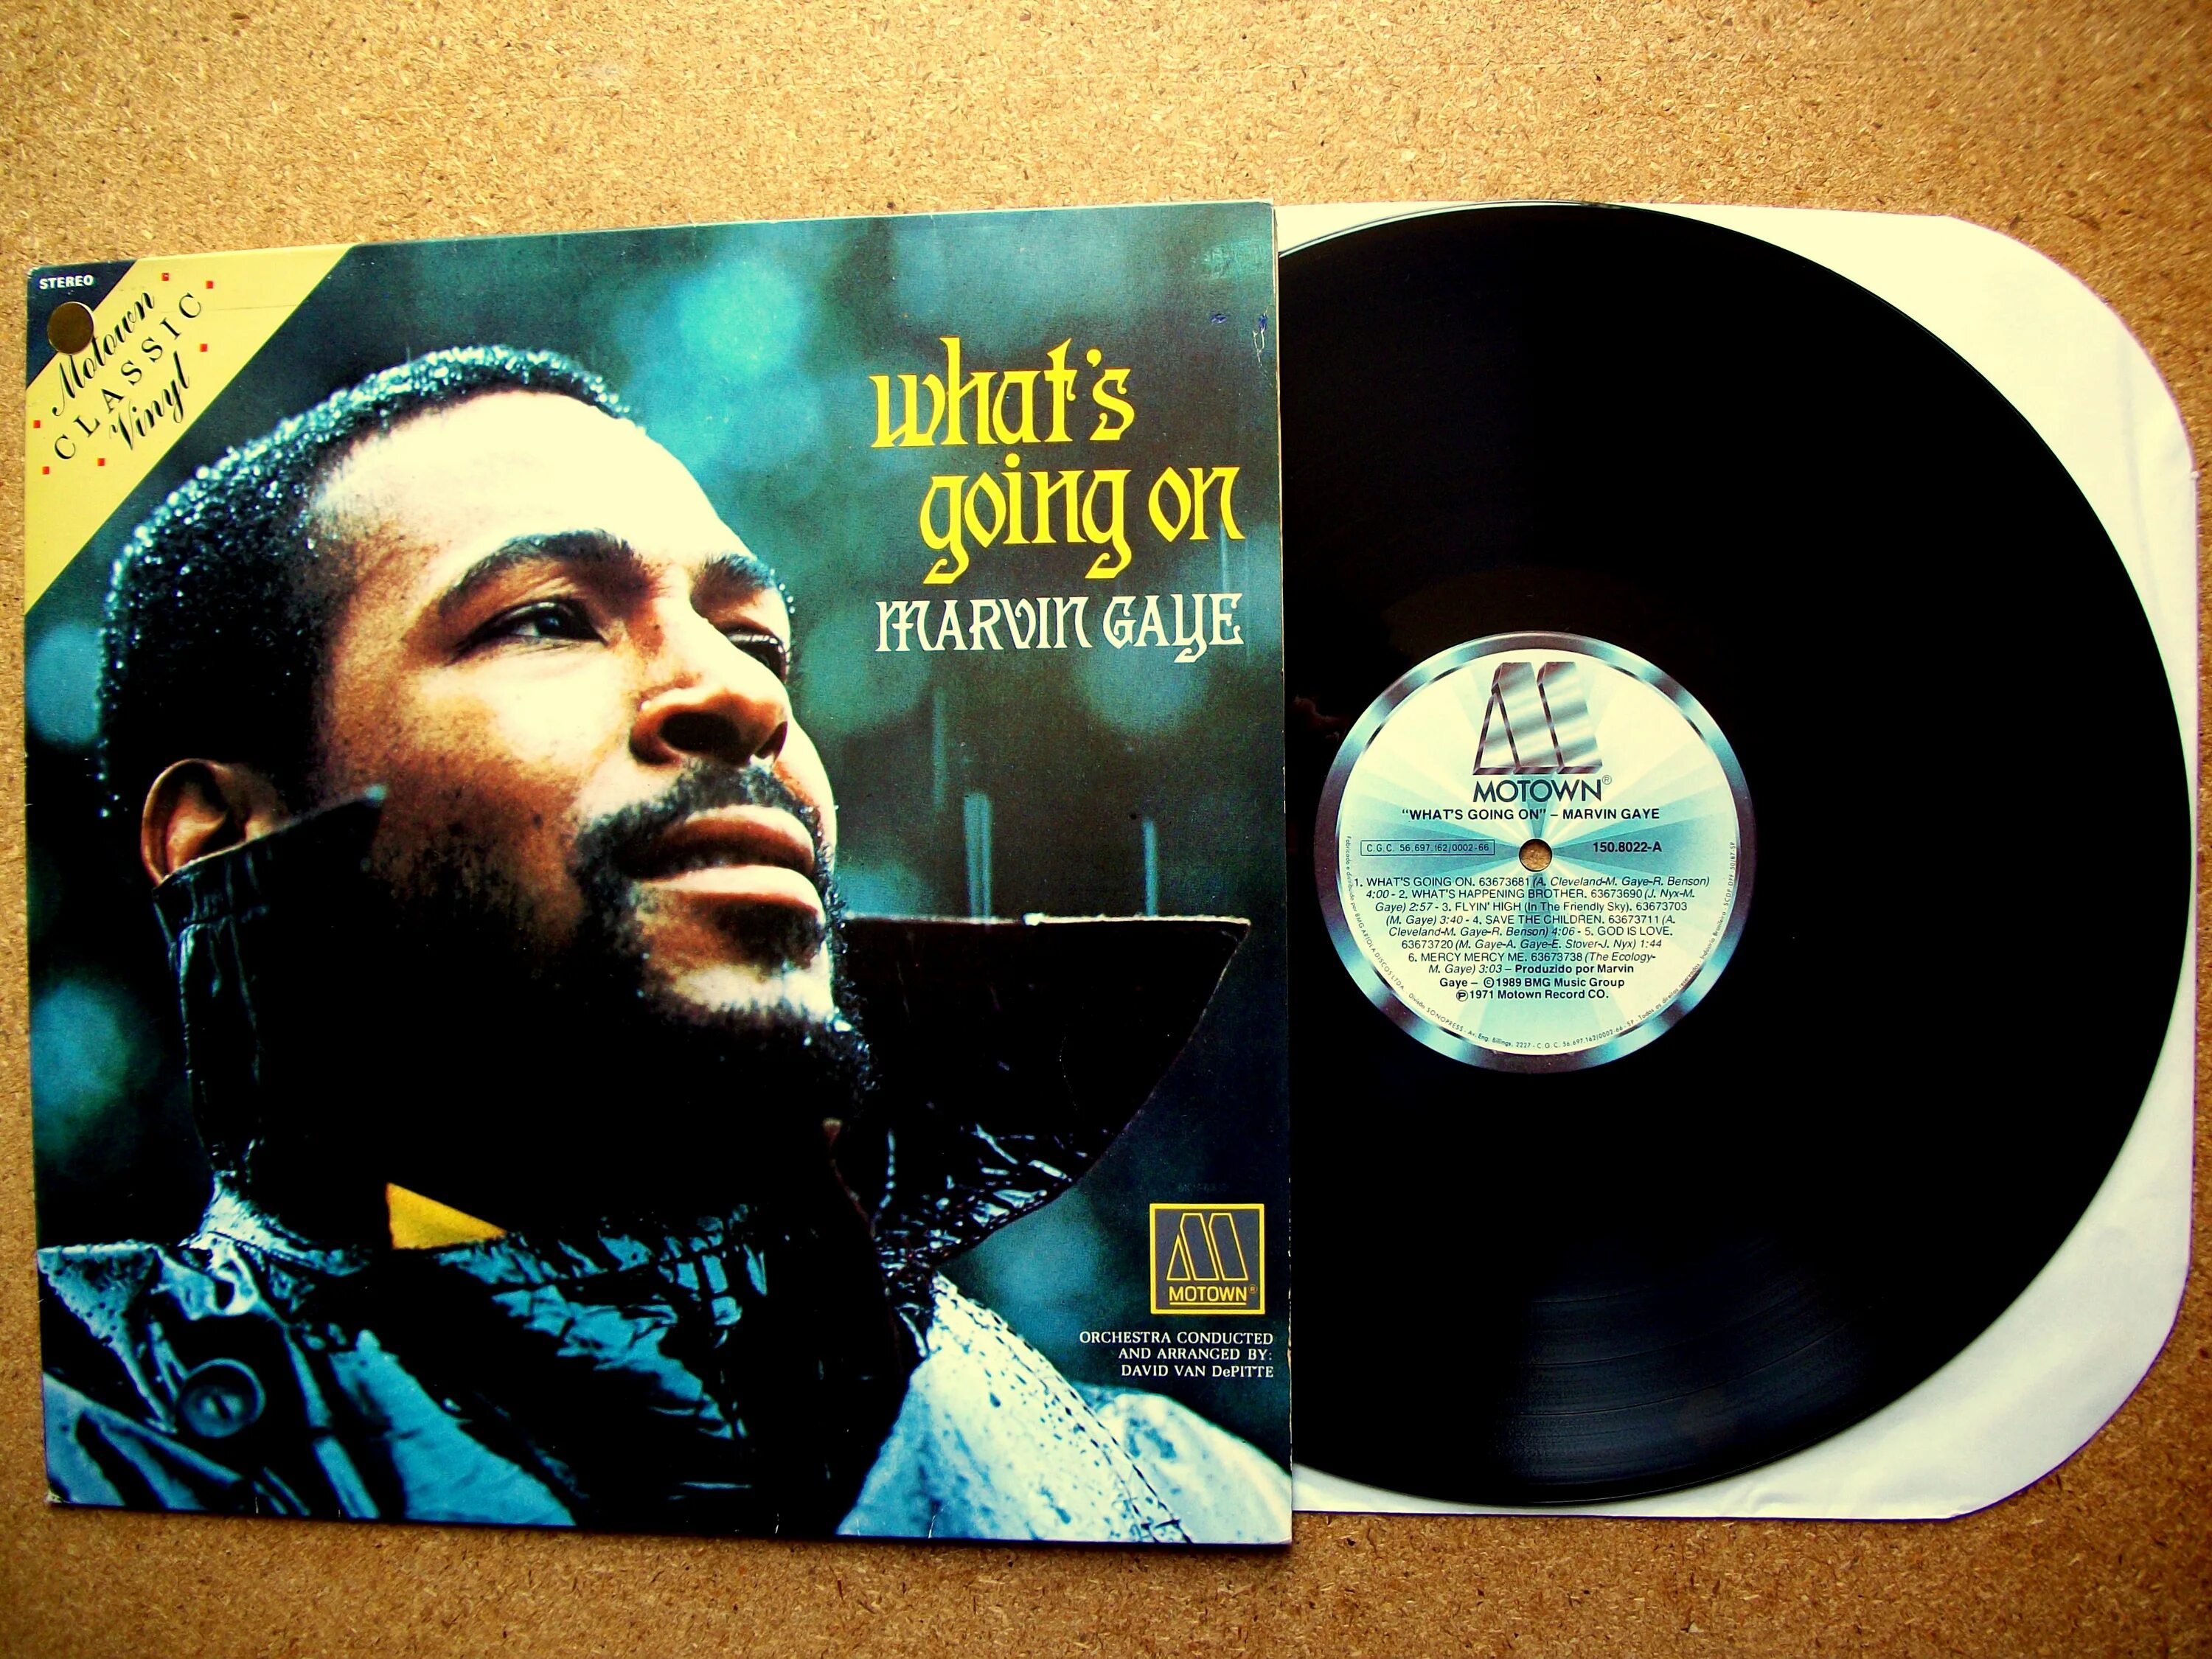 Marvin Gaye-1971. Marvin Gaye what's going on 1971. What’s going on Марвин Гэй. Marvin Gaye - what"s going on 1971 обложка.